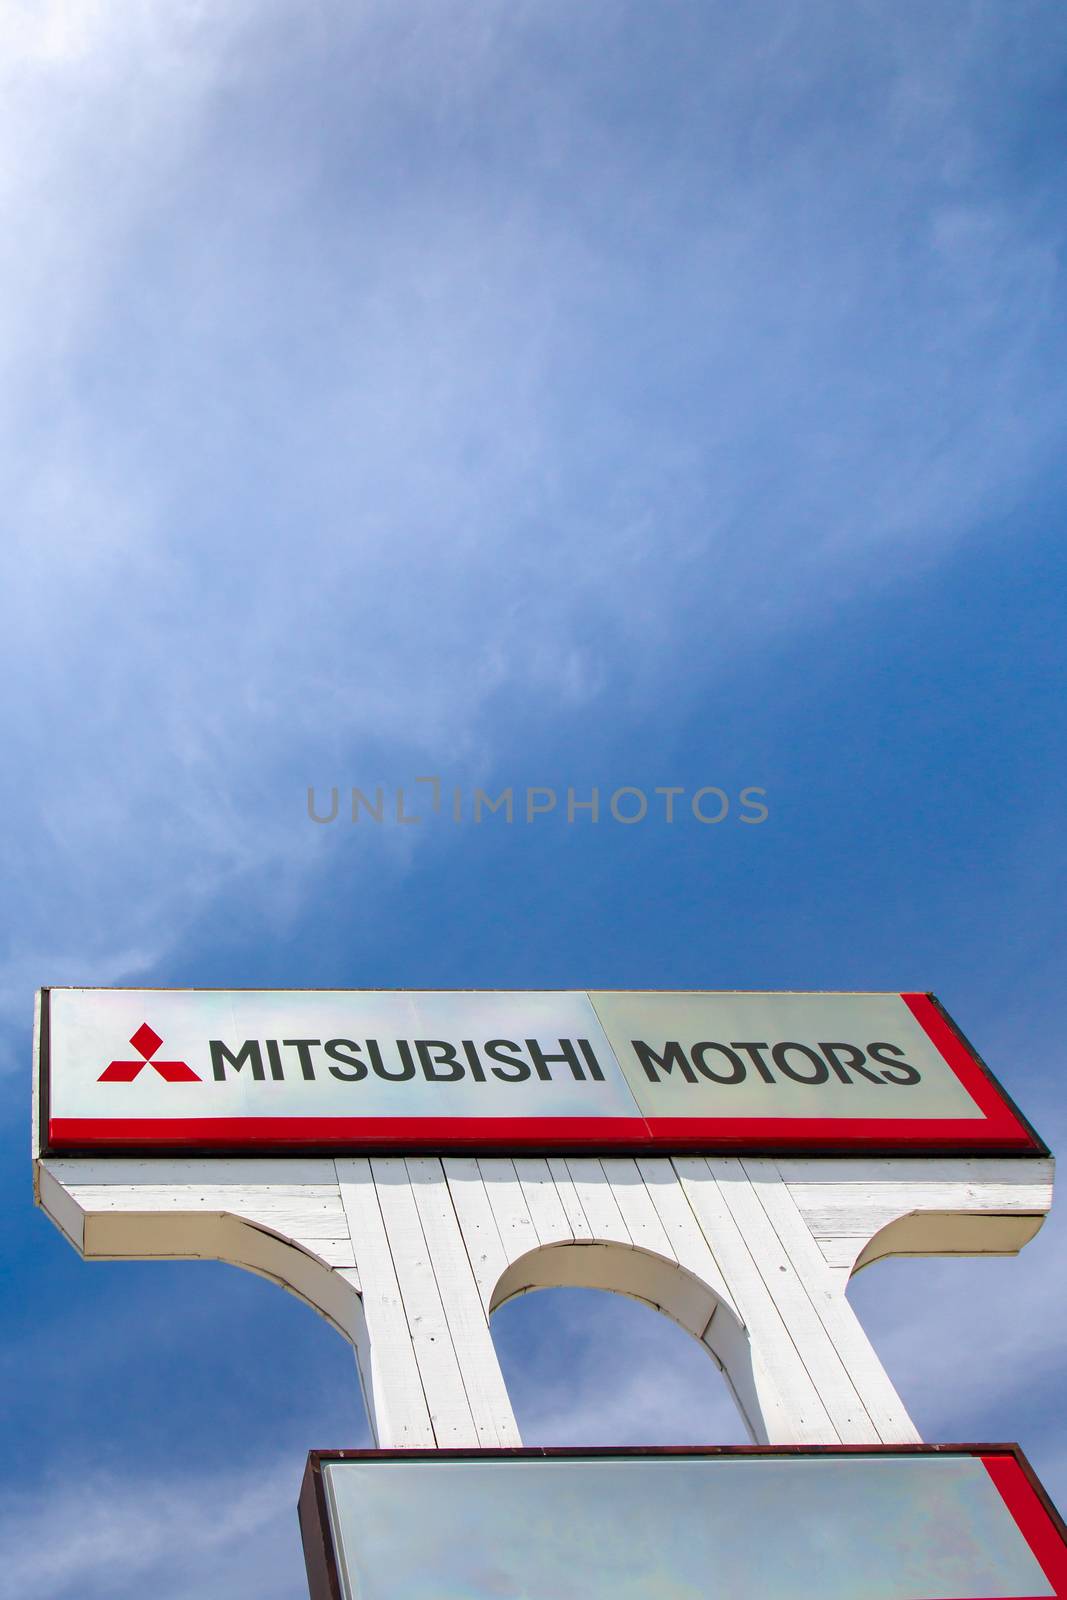 SAN JOSE,CA/USA - MAY 24, 2014: Mitsubishi Motors Autombile Dealership Sign. Mitsubishi is a Japanese manufacturer of automobiles and commercial vehicles.